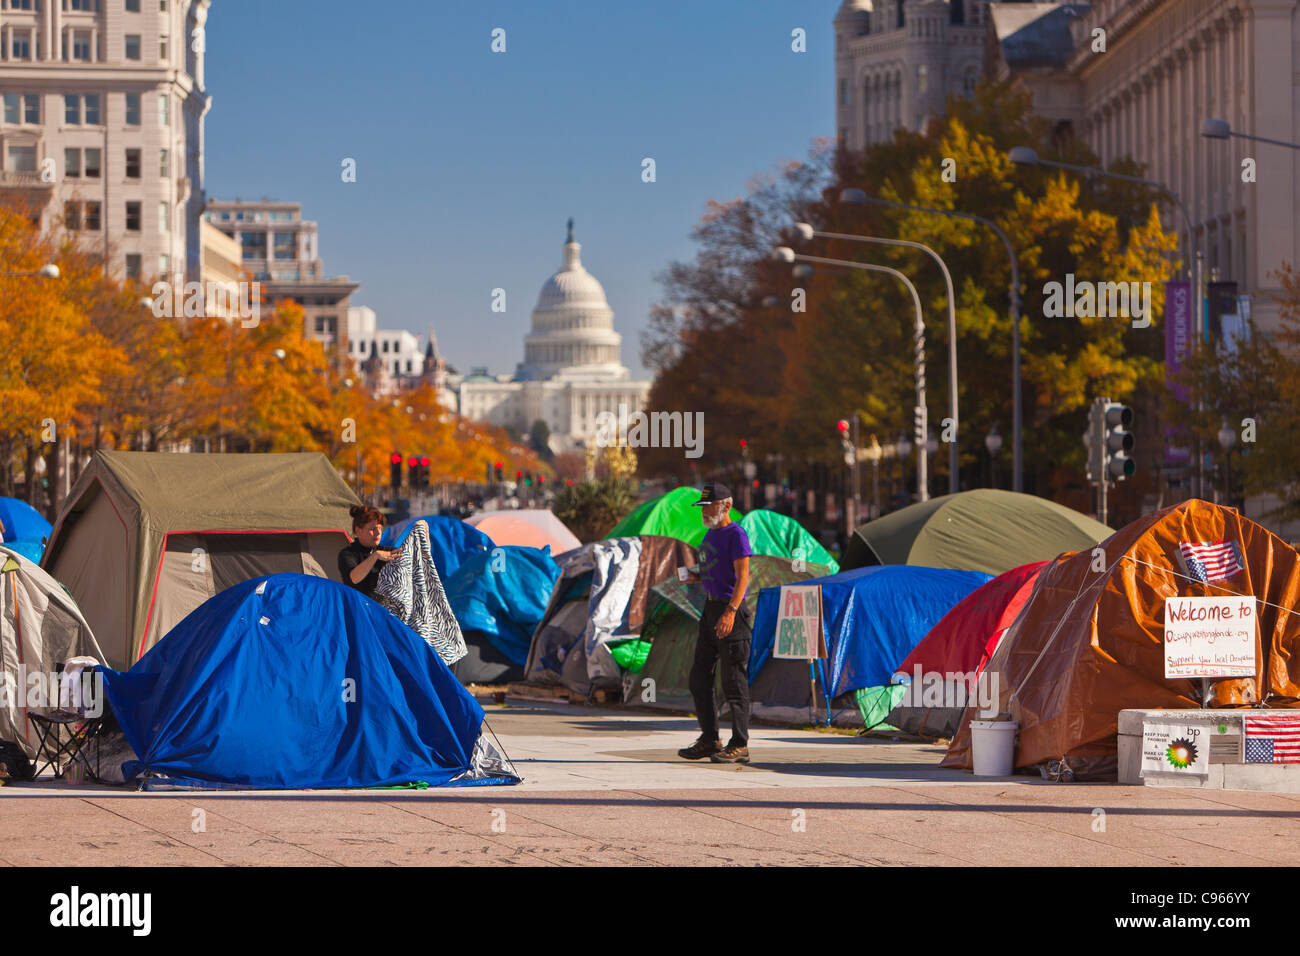 WASHINGTON, DC USA - Occupy Washington protest camp at Freedom Plaza and U.S. Capitol dome in distance. Stock Photo